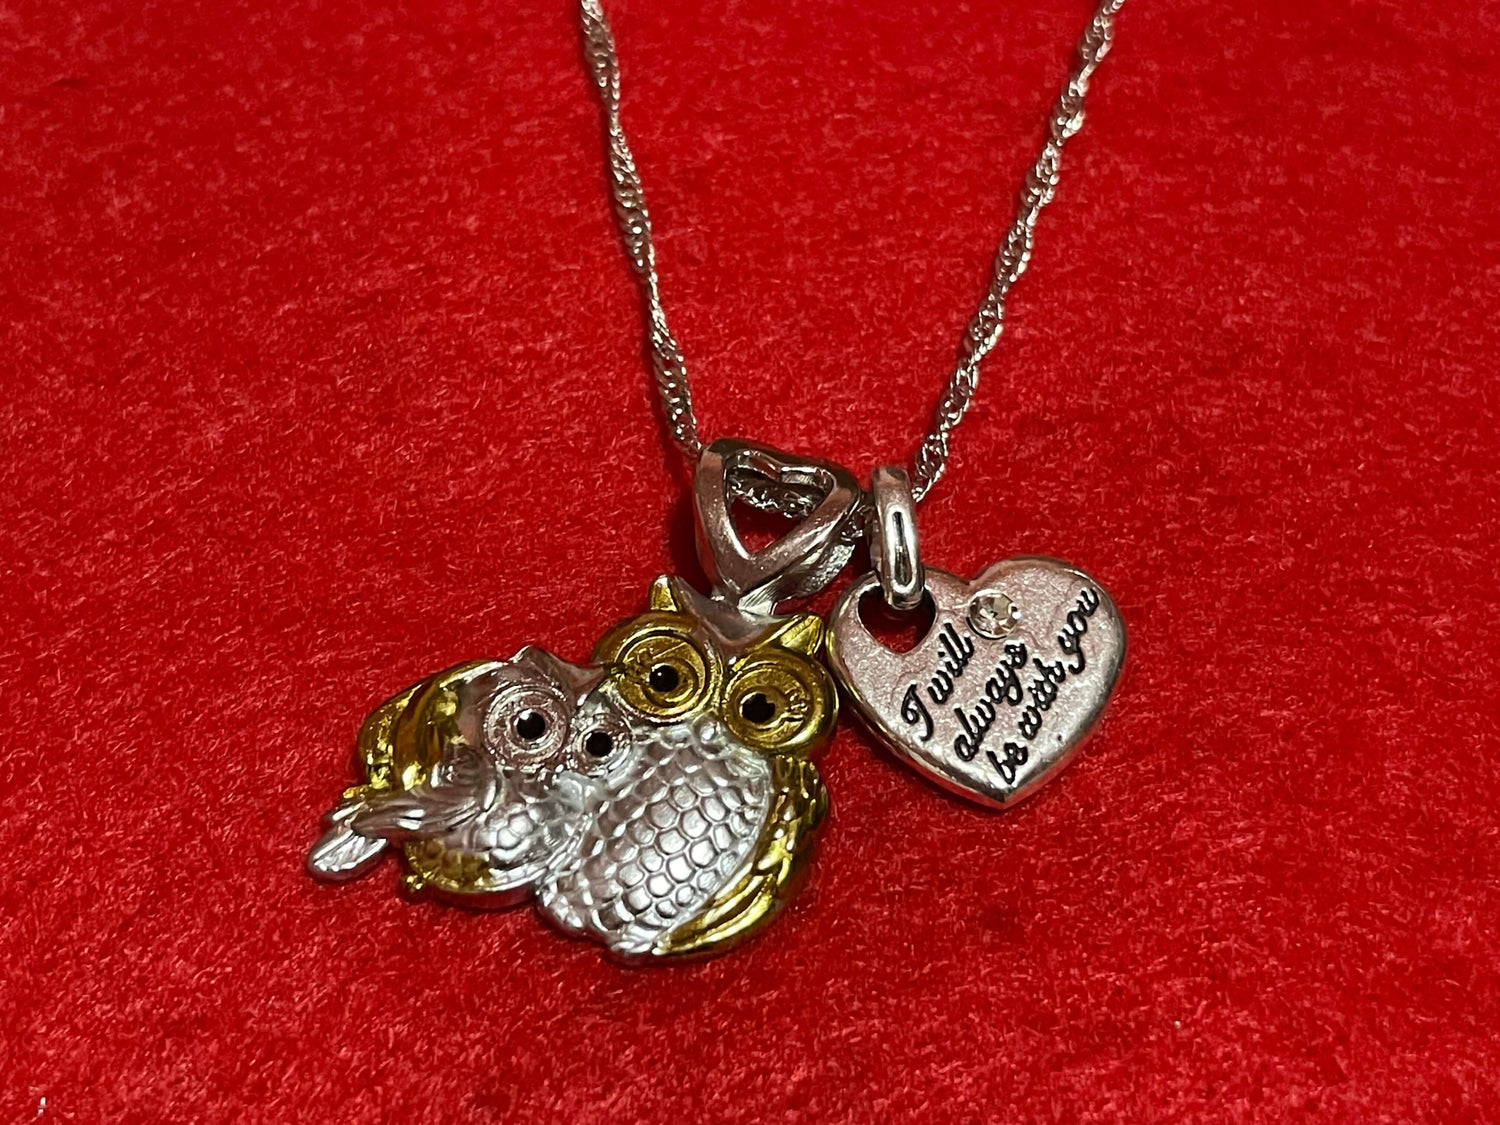 Charm pendant owl necklace “I will always be with you “